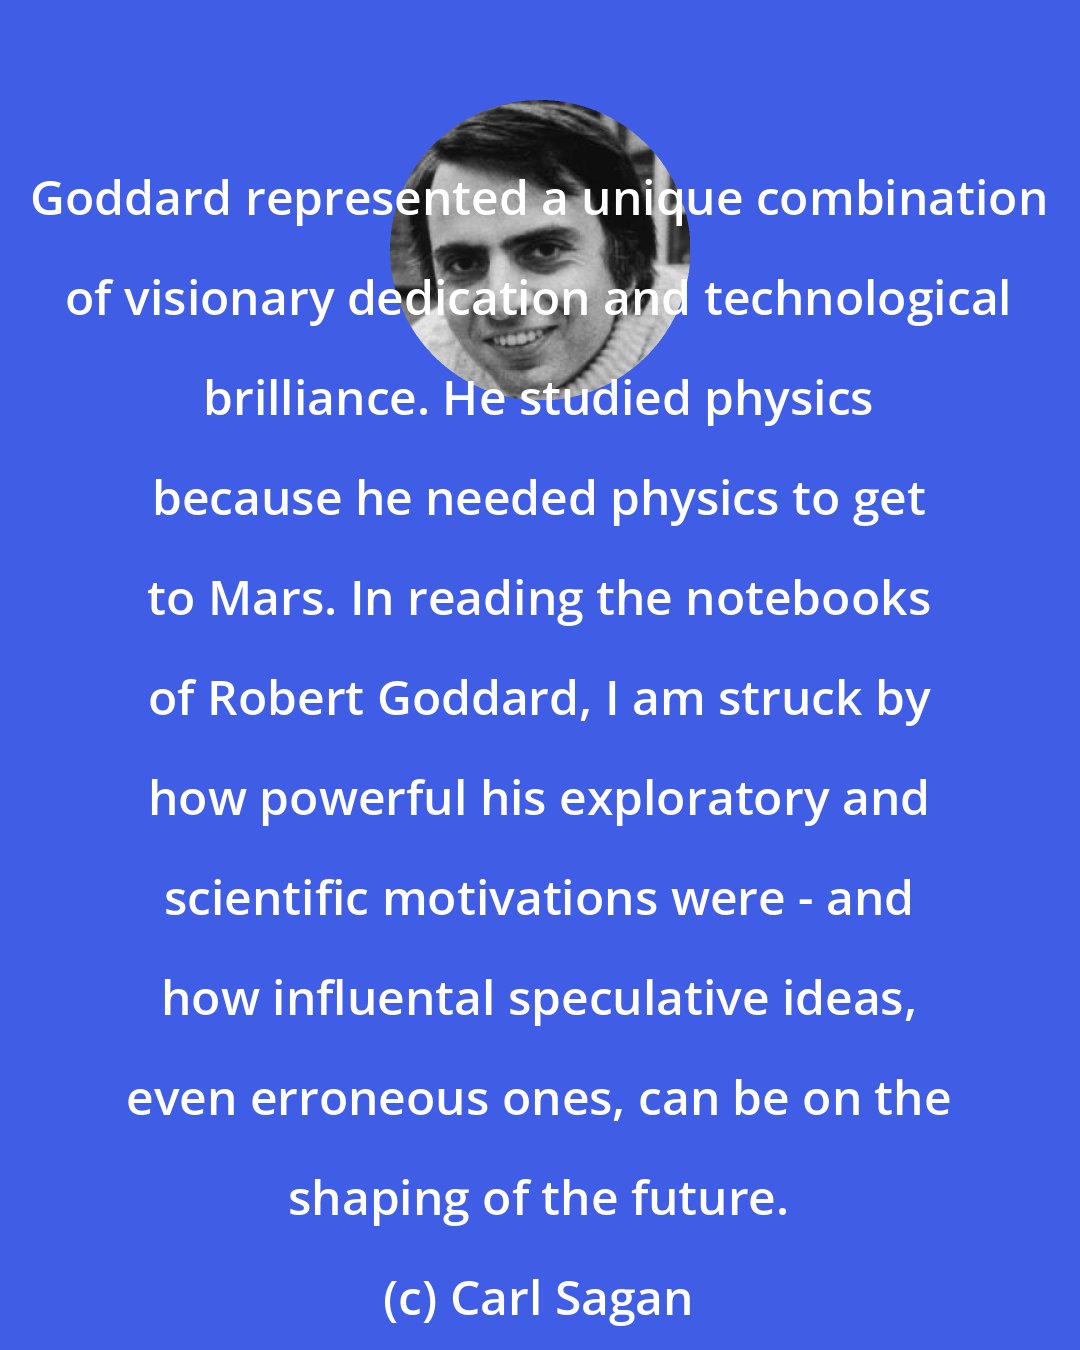 Carl Sagan: Goddard represented a unique combination of visionary dedication and technological brilliance. He studied physics because he needed physics to get to Mars. In reading the notebooks of Robert Goddard, I am struck by how powerful his exploratory and scientific motivations were - and how influental speculative ideas, even erroneous ones, can be on the shaping of the future.